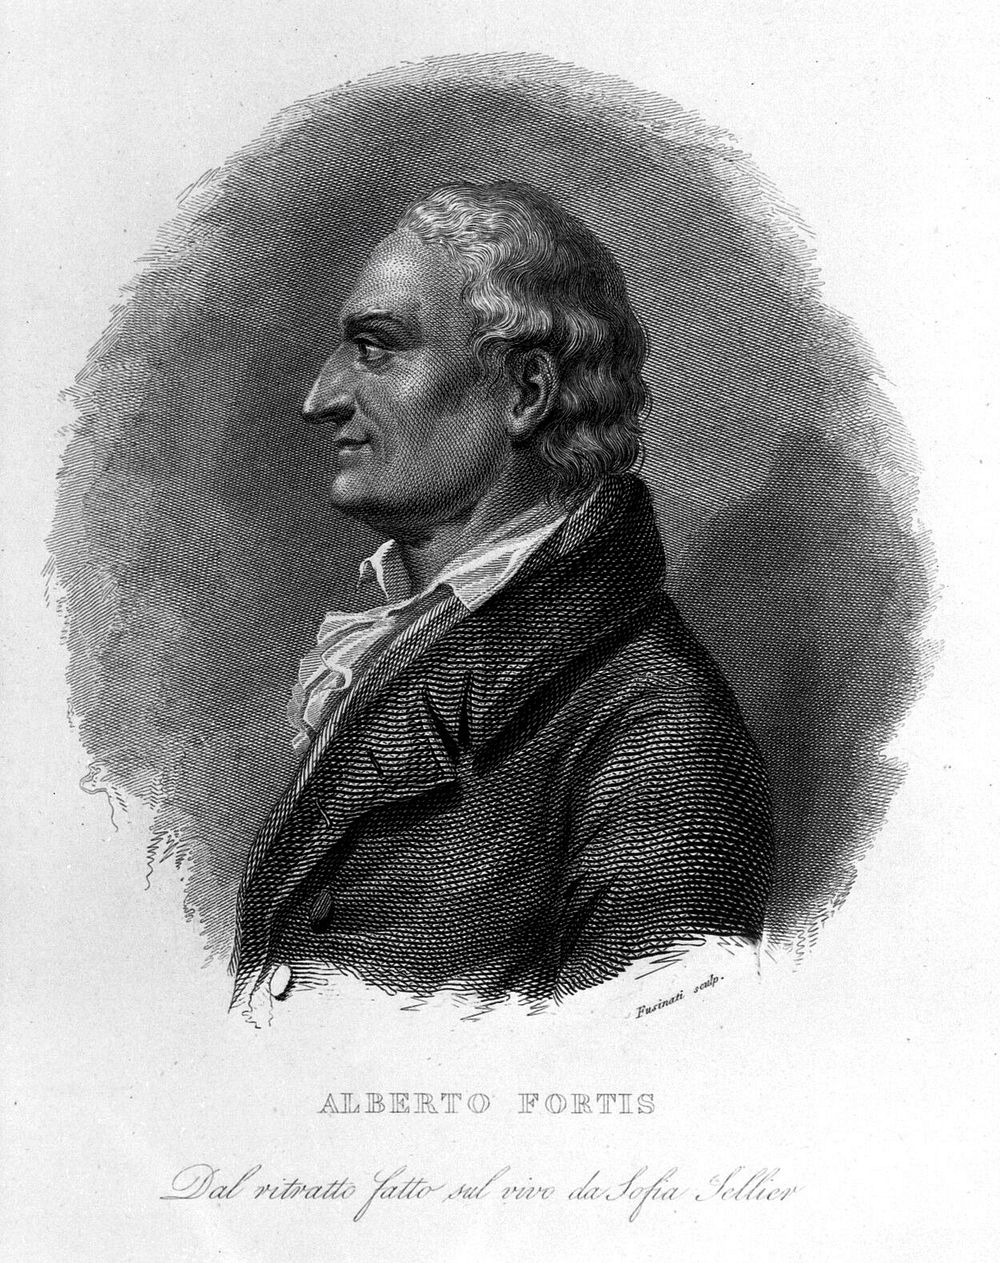 Alberto Fortis. Line engraving by G. Fusinati after Sofia Sellier.